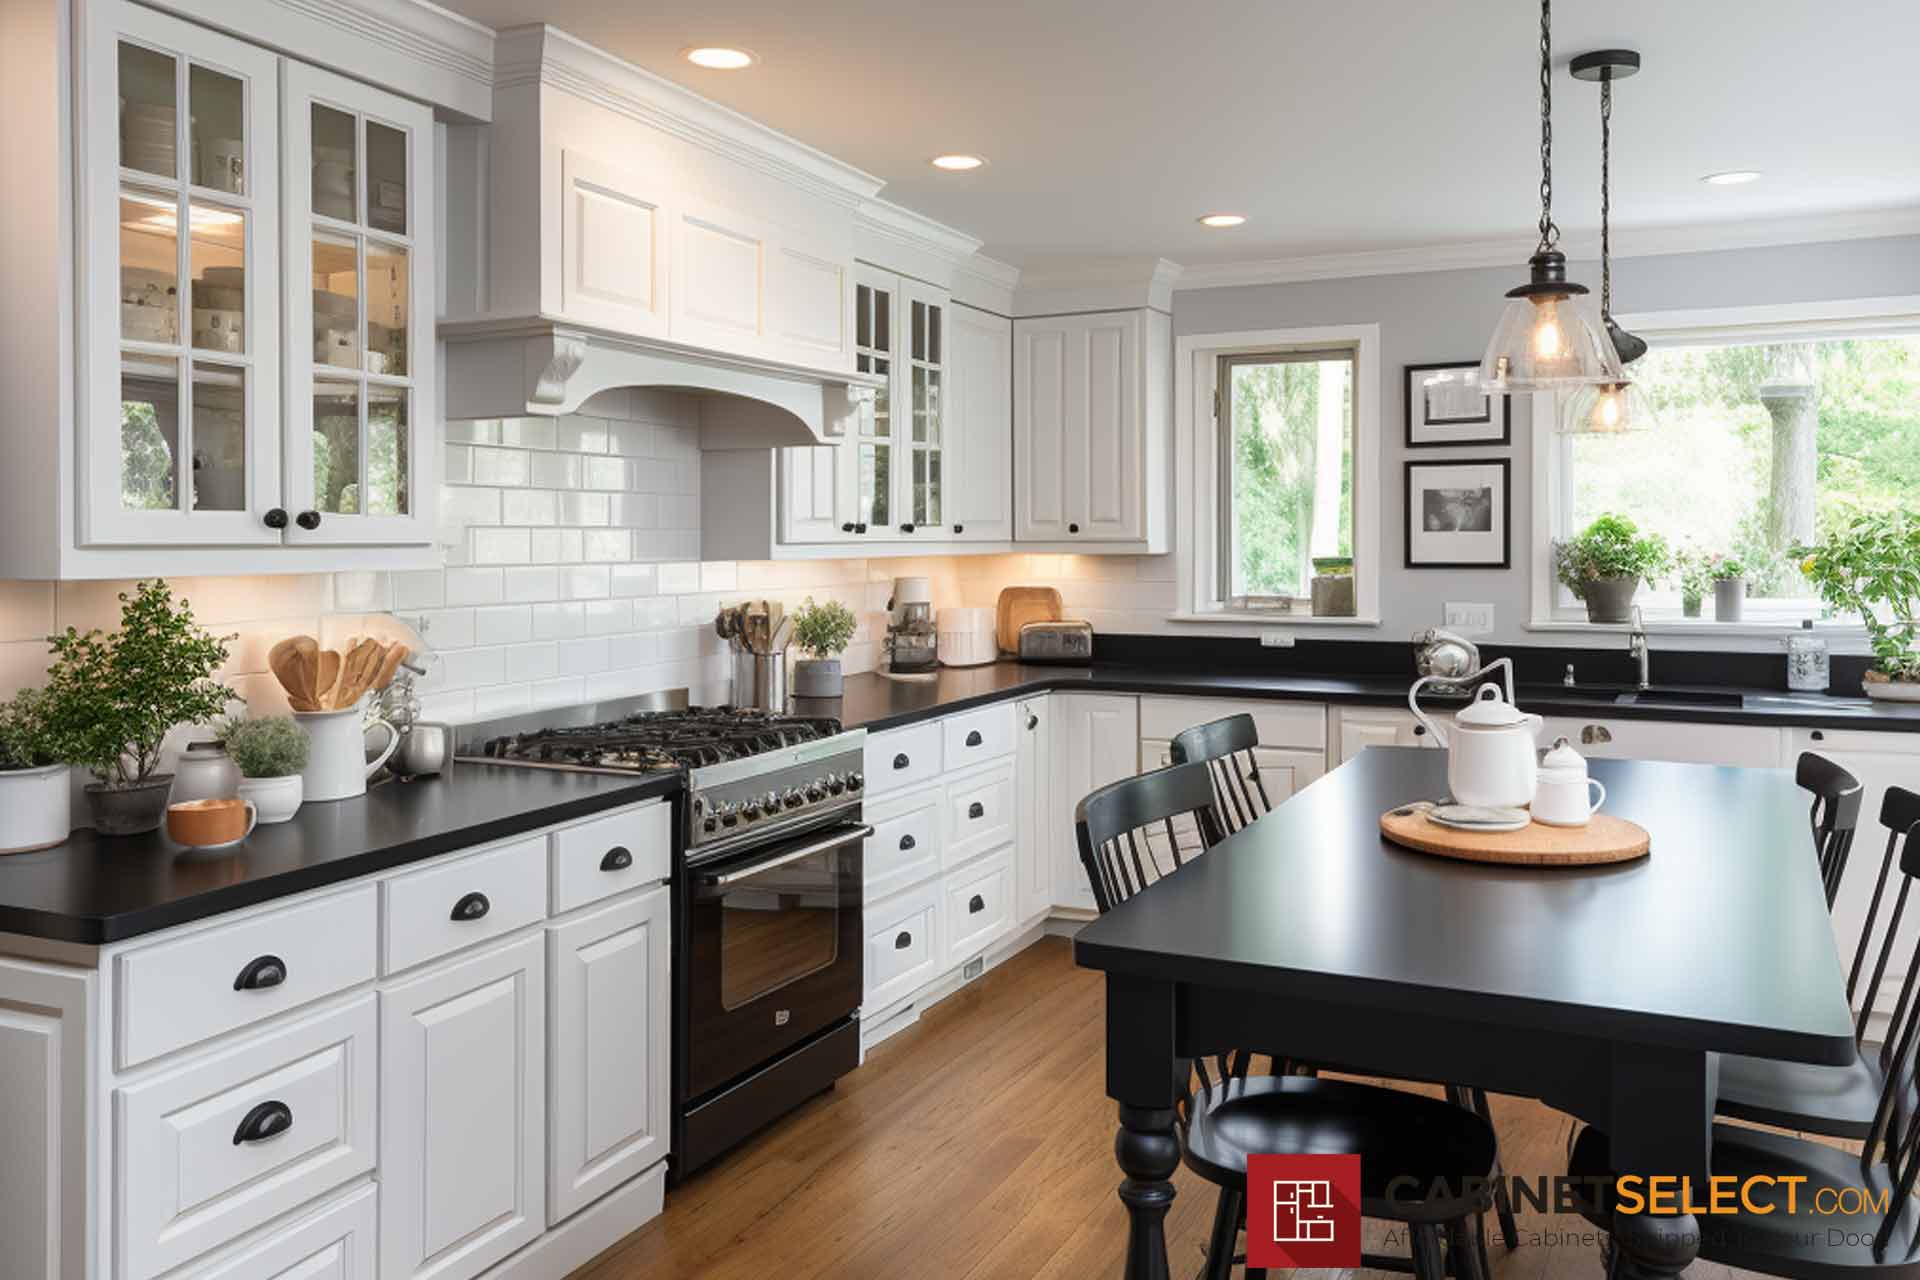 https://cabinetselect.com/cswp/wp-content/uploads/2023/08/timeless-white-cabinets-black-appliances-2.jpg